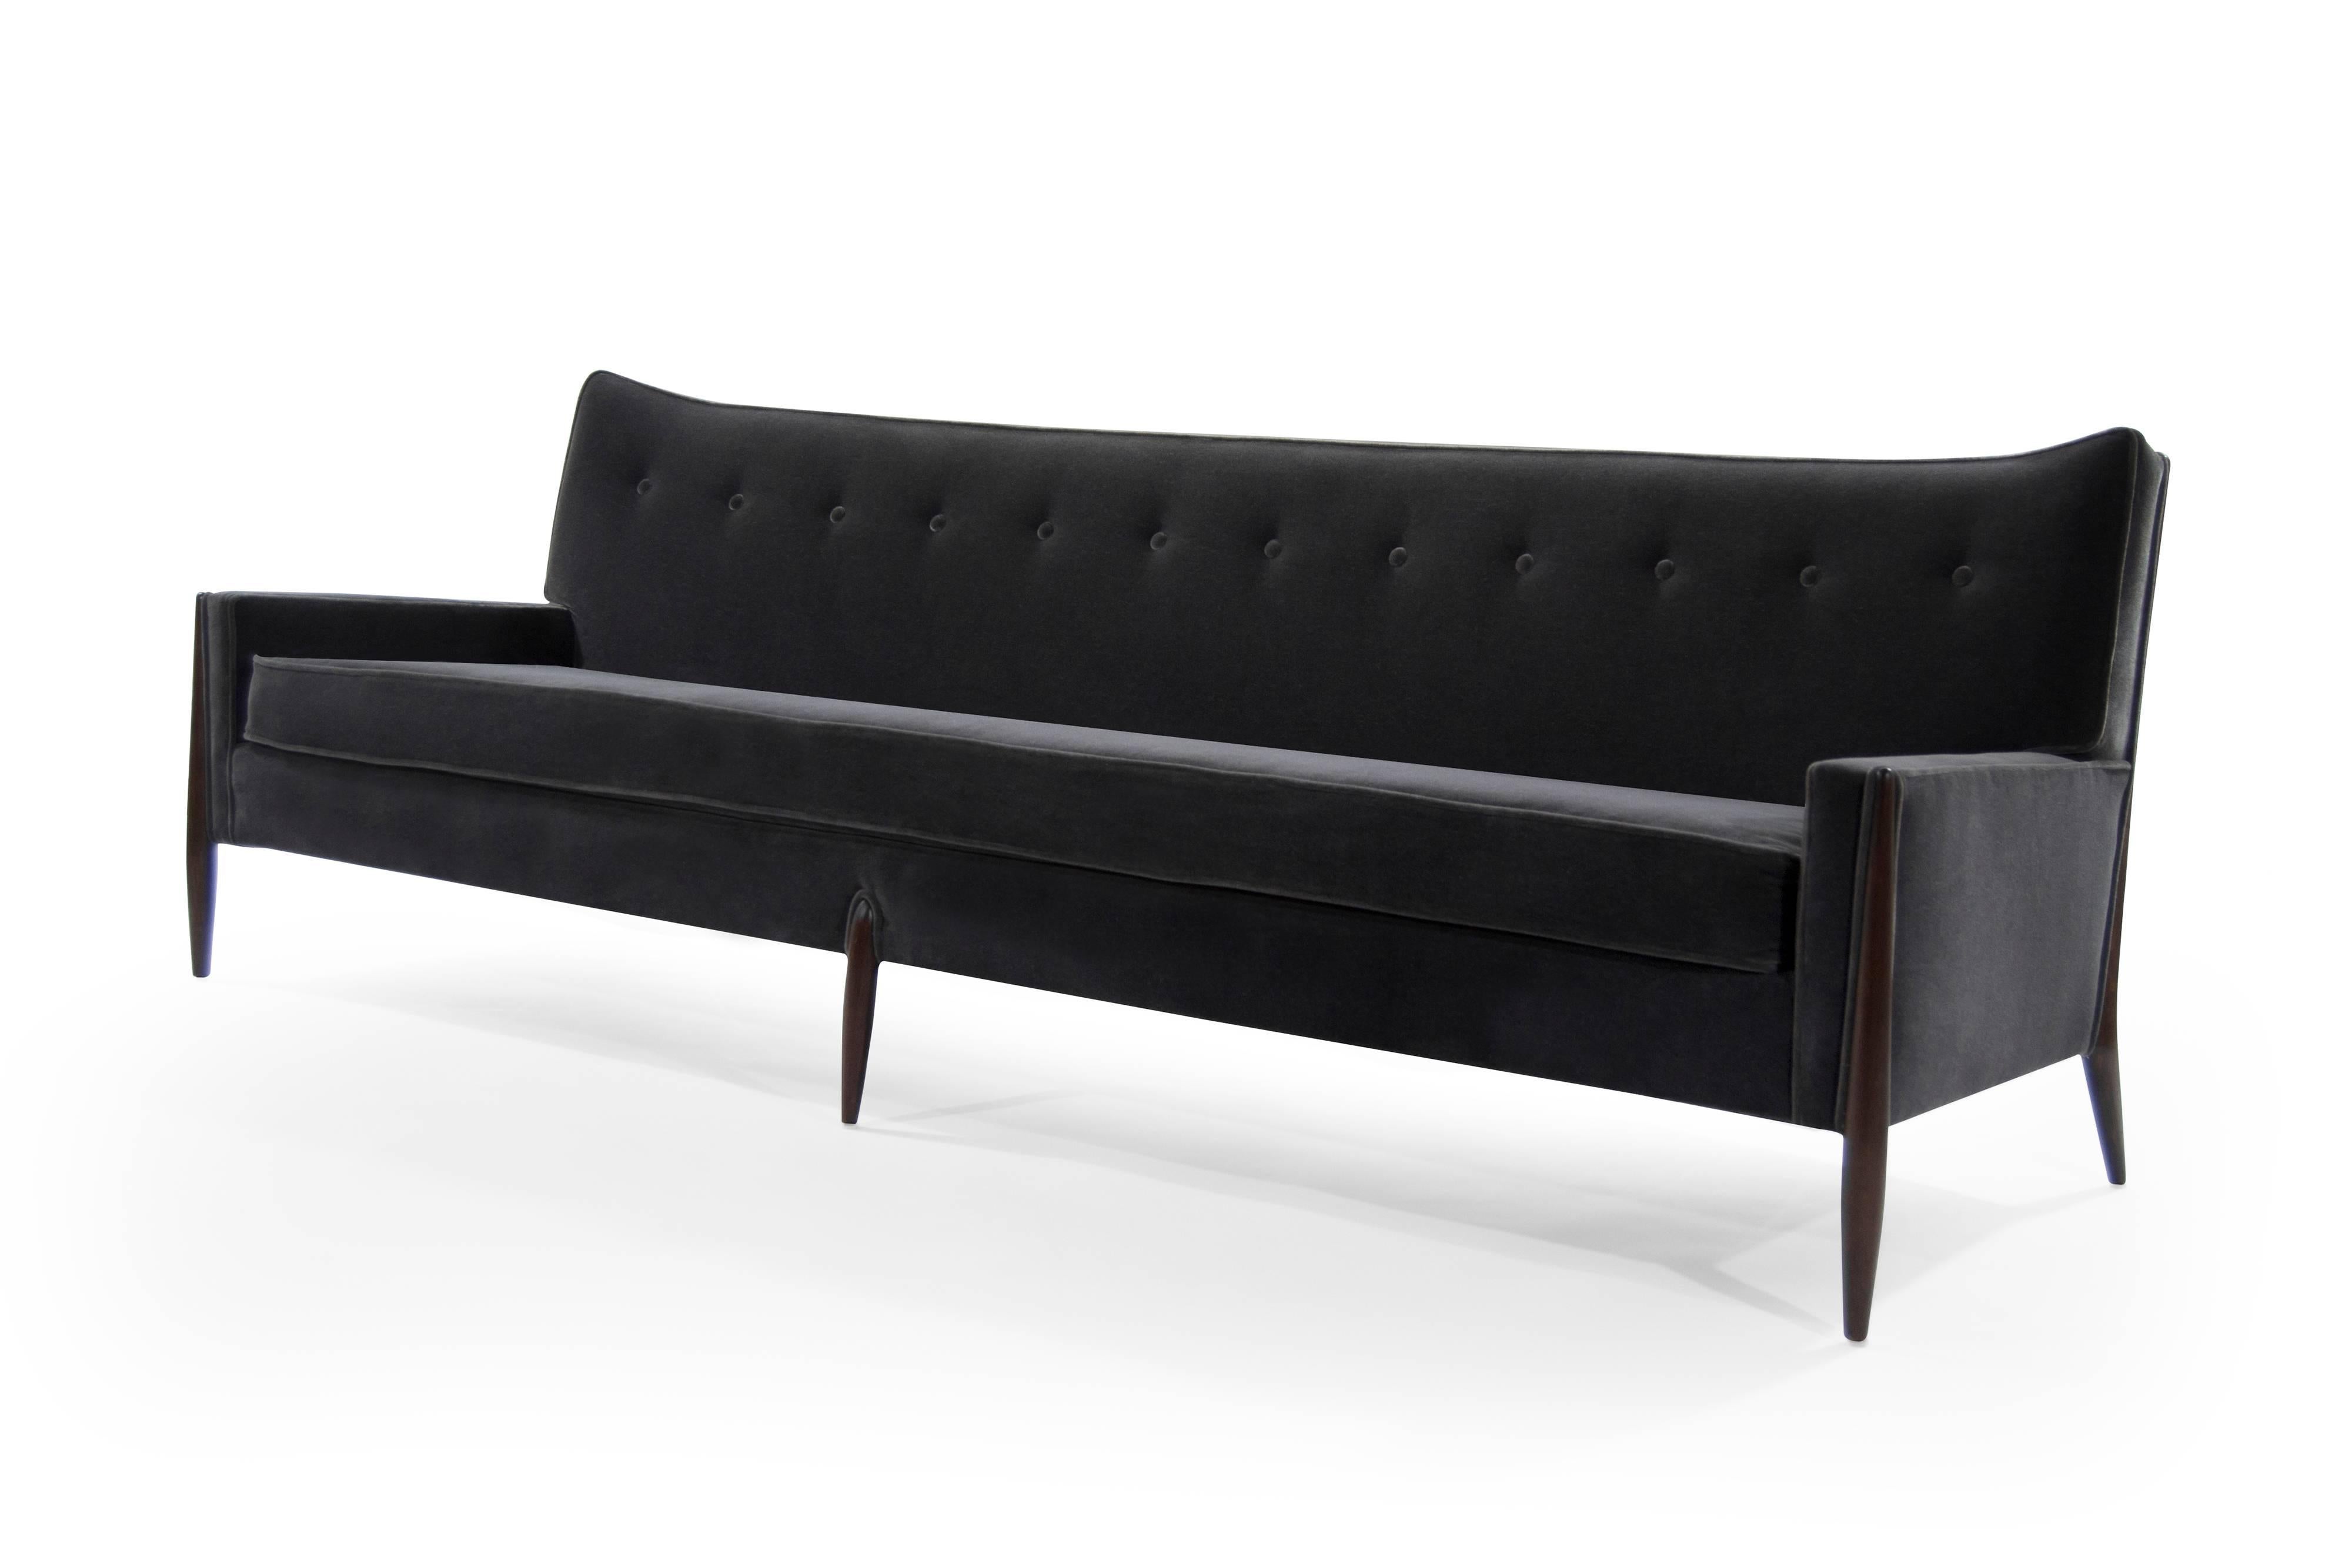 Long and comfortable Mid-Century Modern sofa designed by Jules Heumann for Metropolitan, circa 1960s.

Newly upholstered in charcoal mohair. Walnut fully restored.